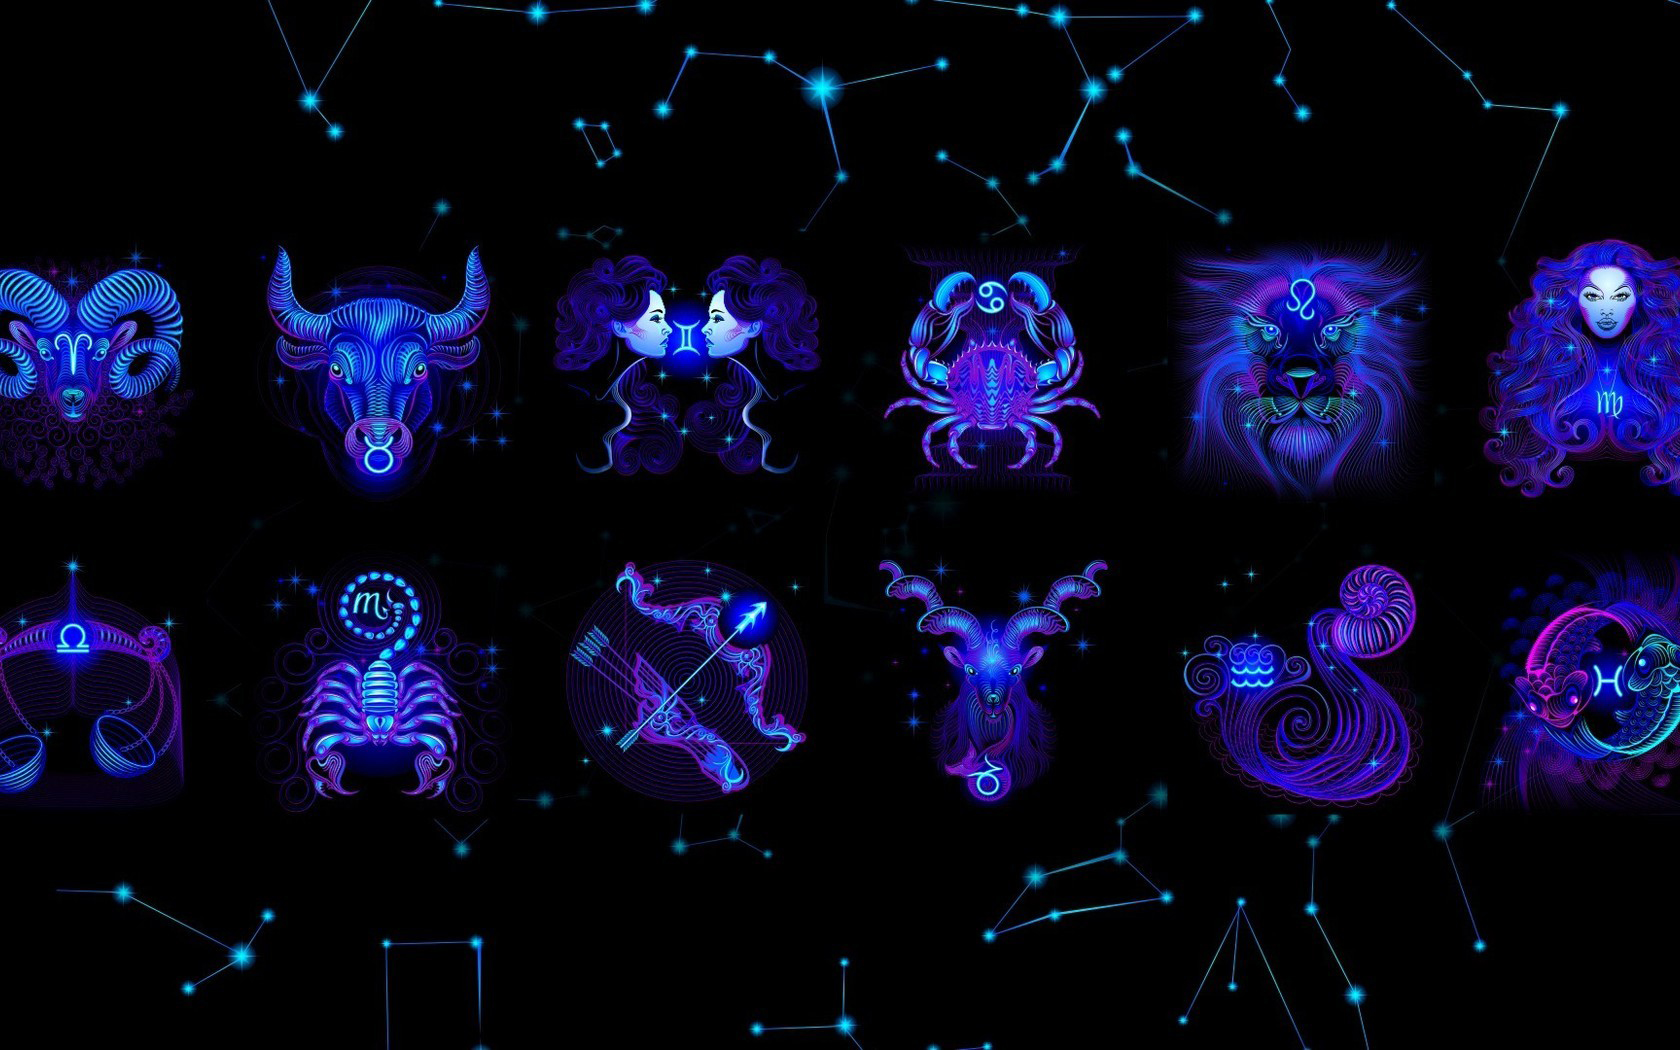 Horoscope HD Wallpapers - HD Wallpapers Backgrounds of Your Choice